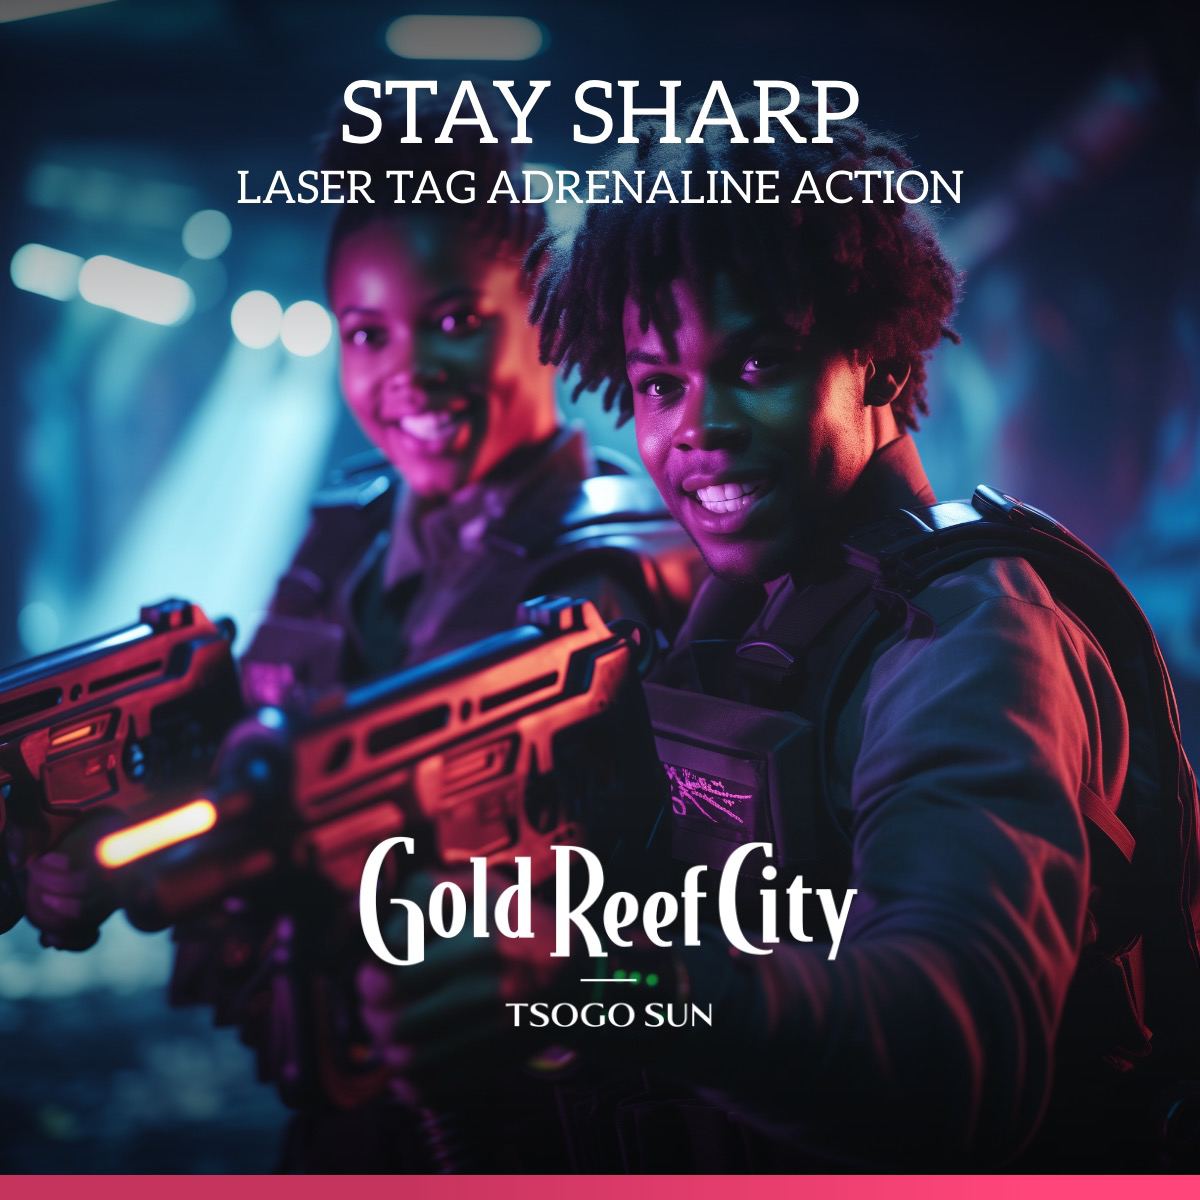 It’s time to put your skills to the test in the Laser Zone arena. Strap up, take aim and earn those bragging rights. Live out your soldier dreams, and command your squadron with elite tactics. Challenge your friends for just R60pp. bit.ly/3OSGpRs